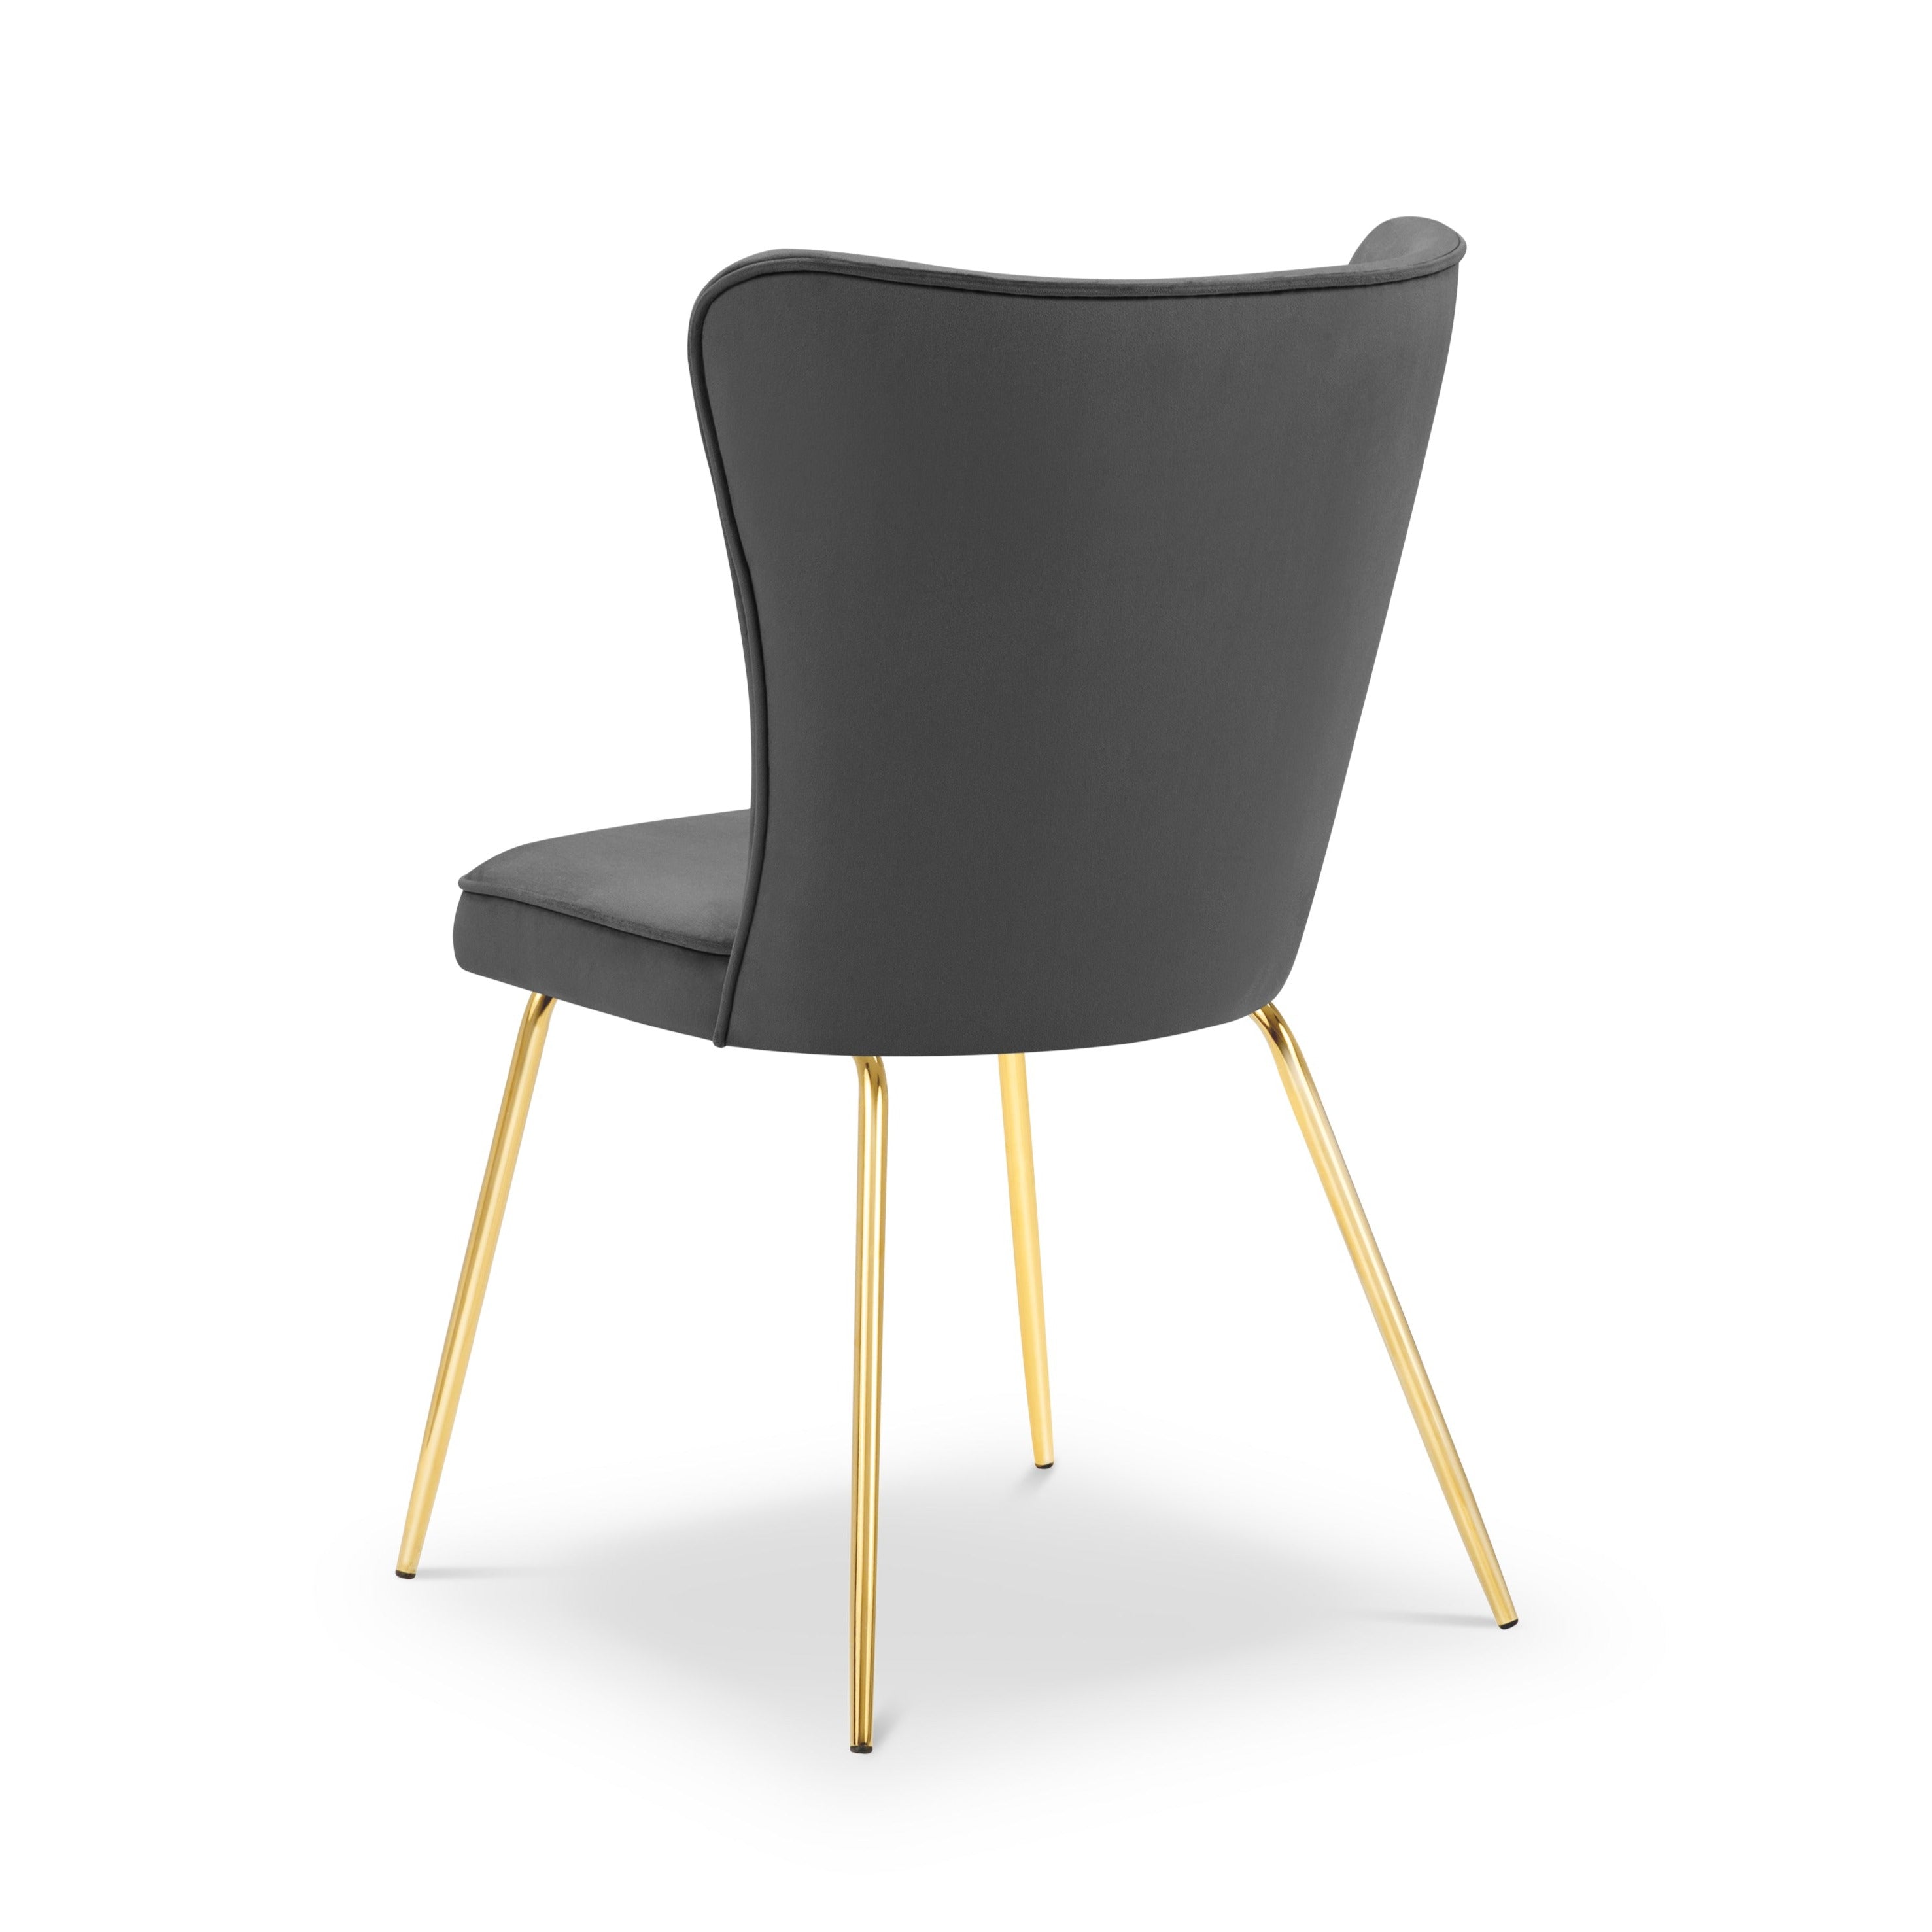 A dark gray chair without armrests